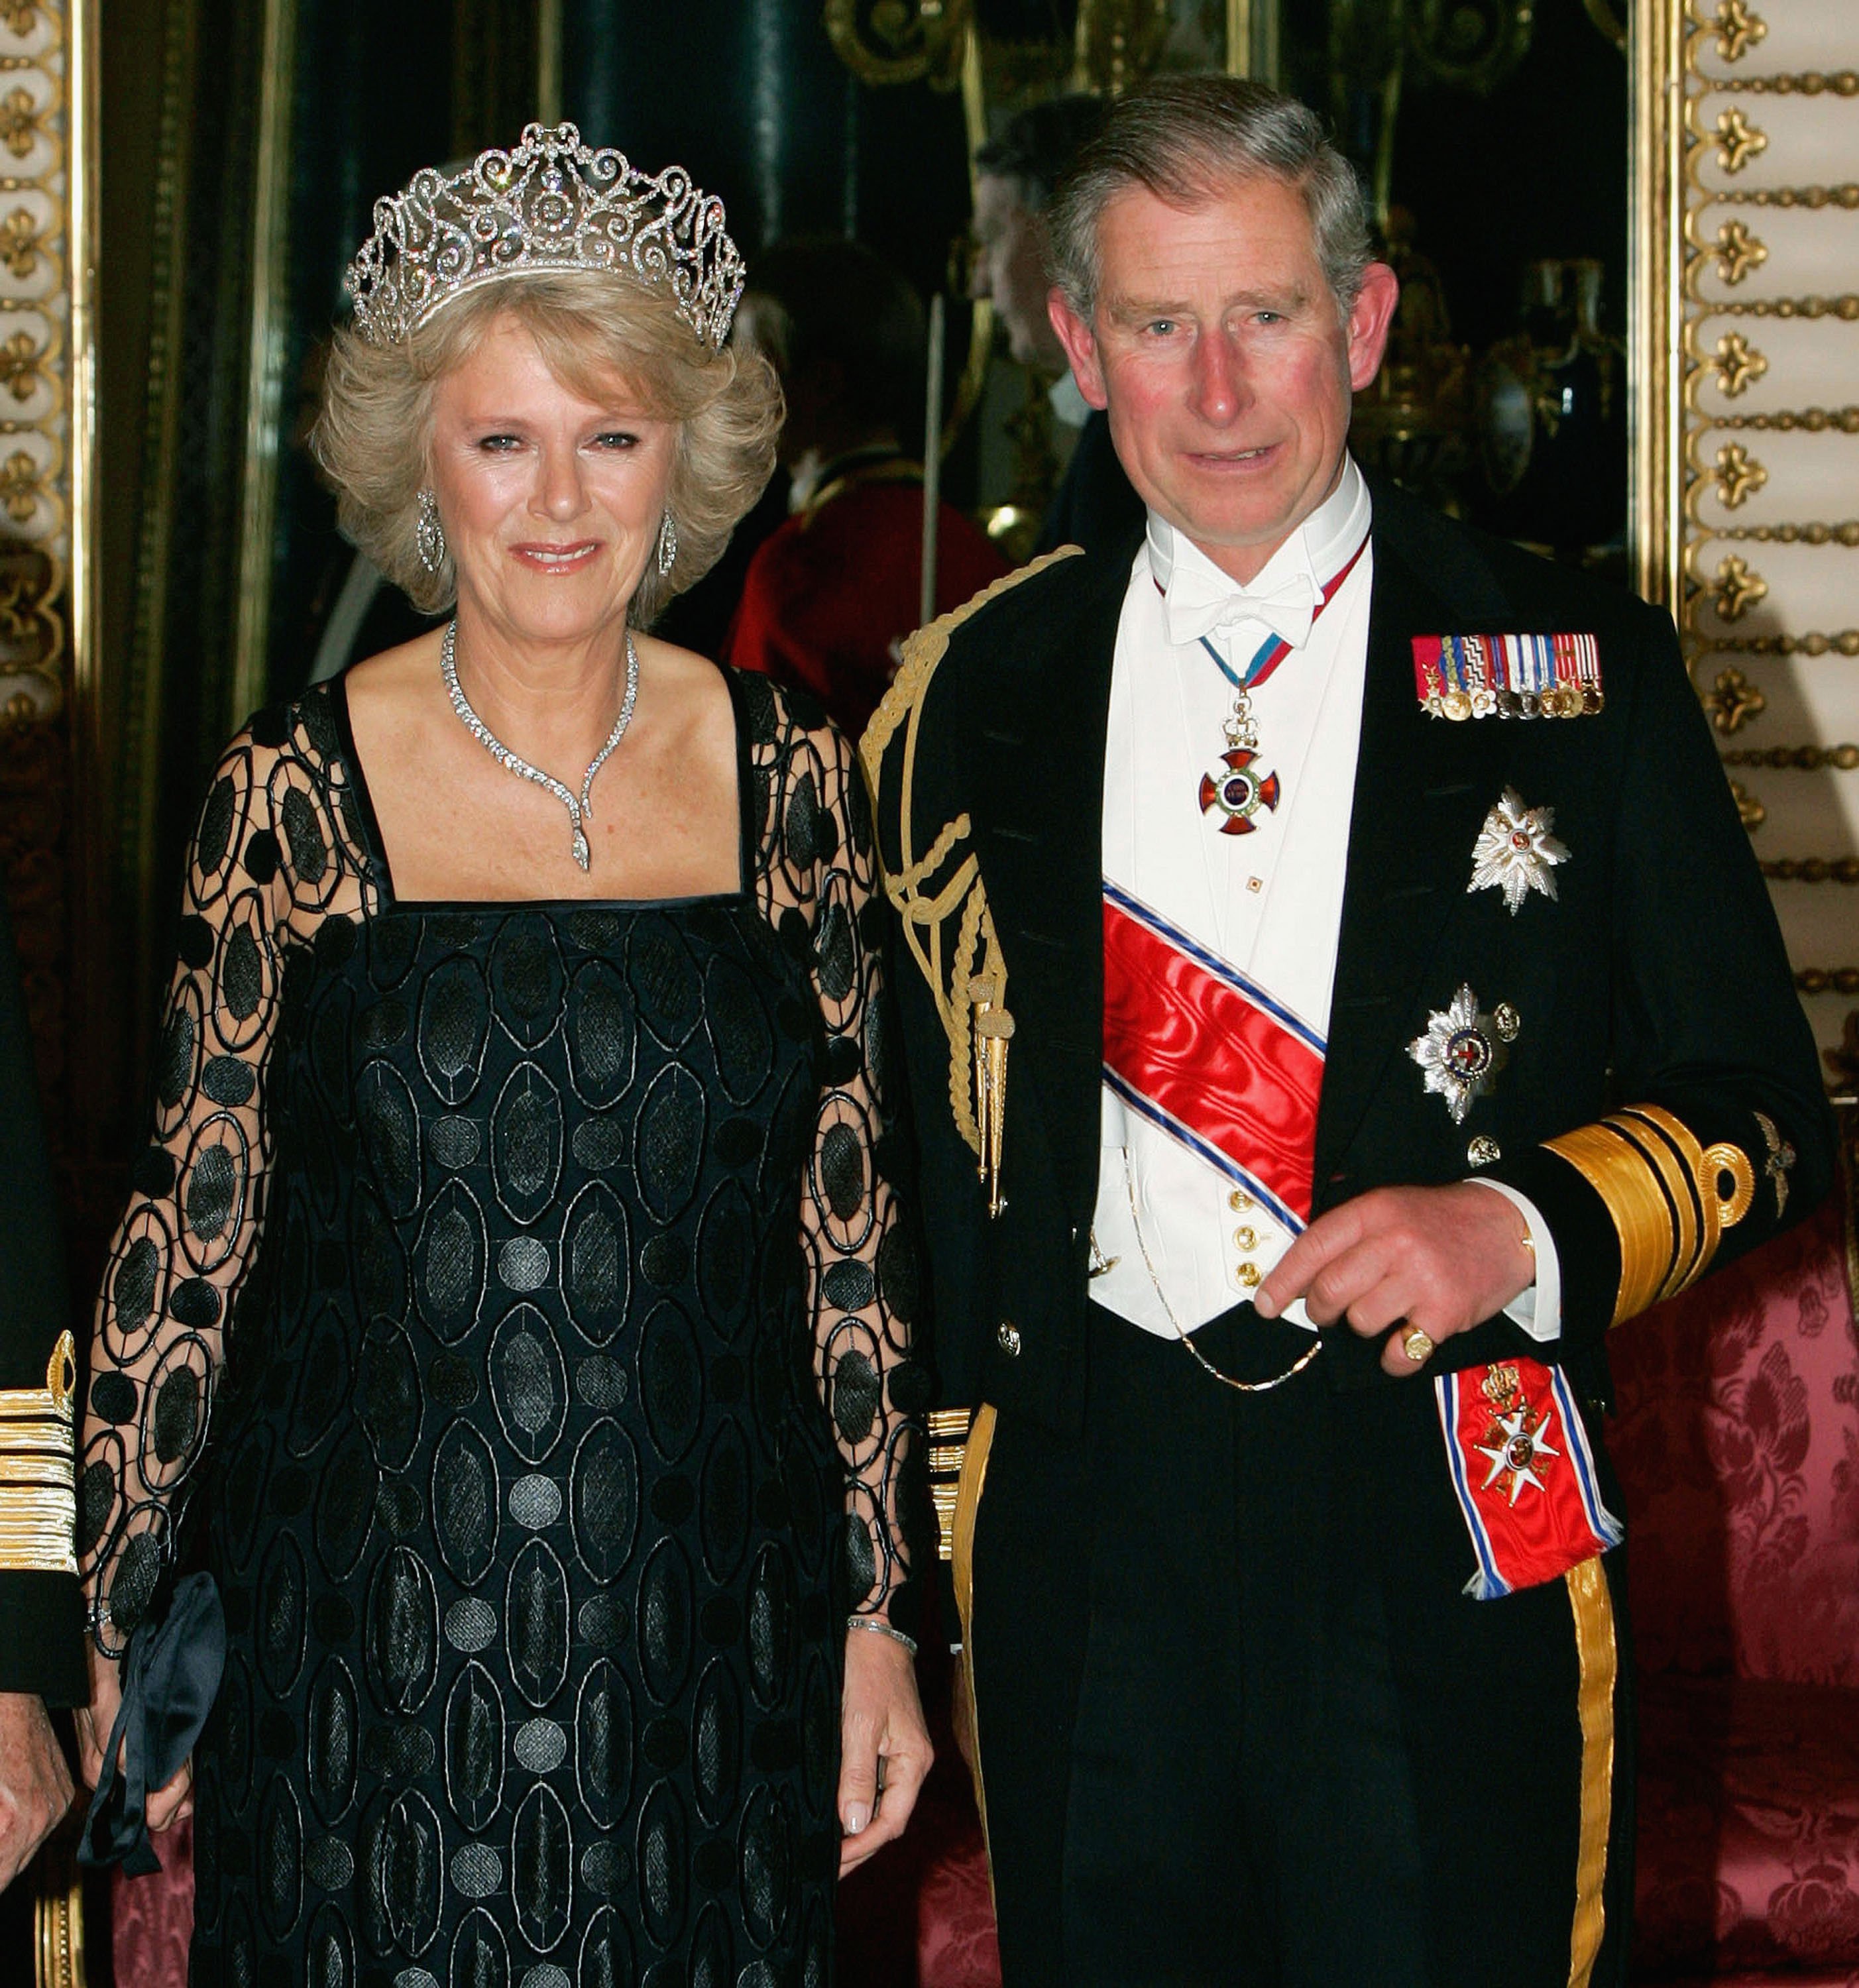 Camilla Duchess of Cornwall arrives with Prince Charles at a banquet in Buckingham Palace on October 25, 2005 in London, England | Source: Getty Images